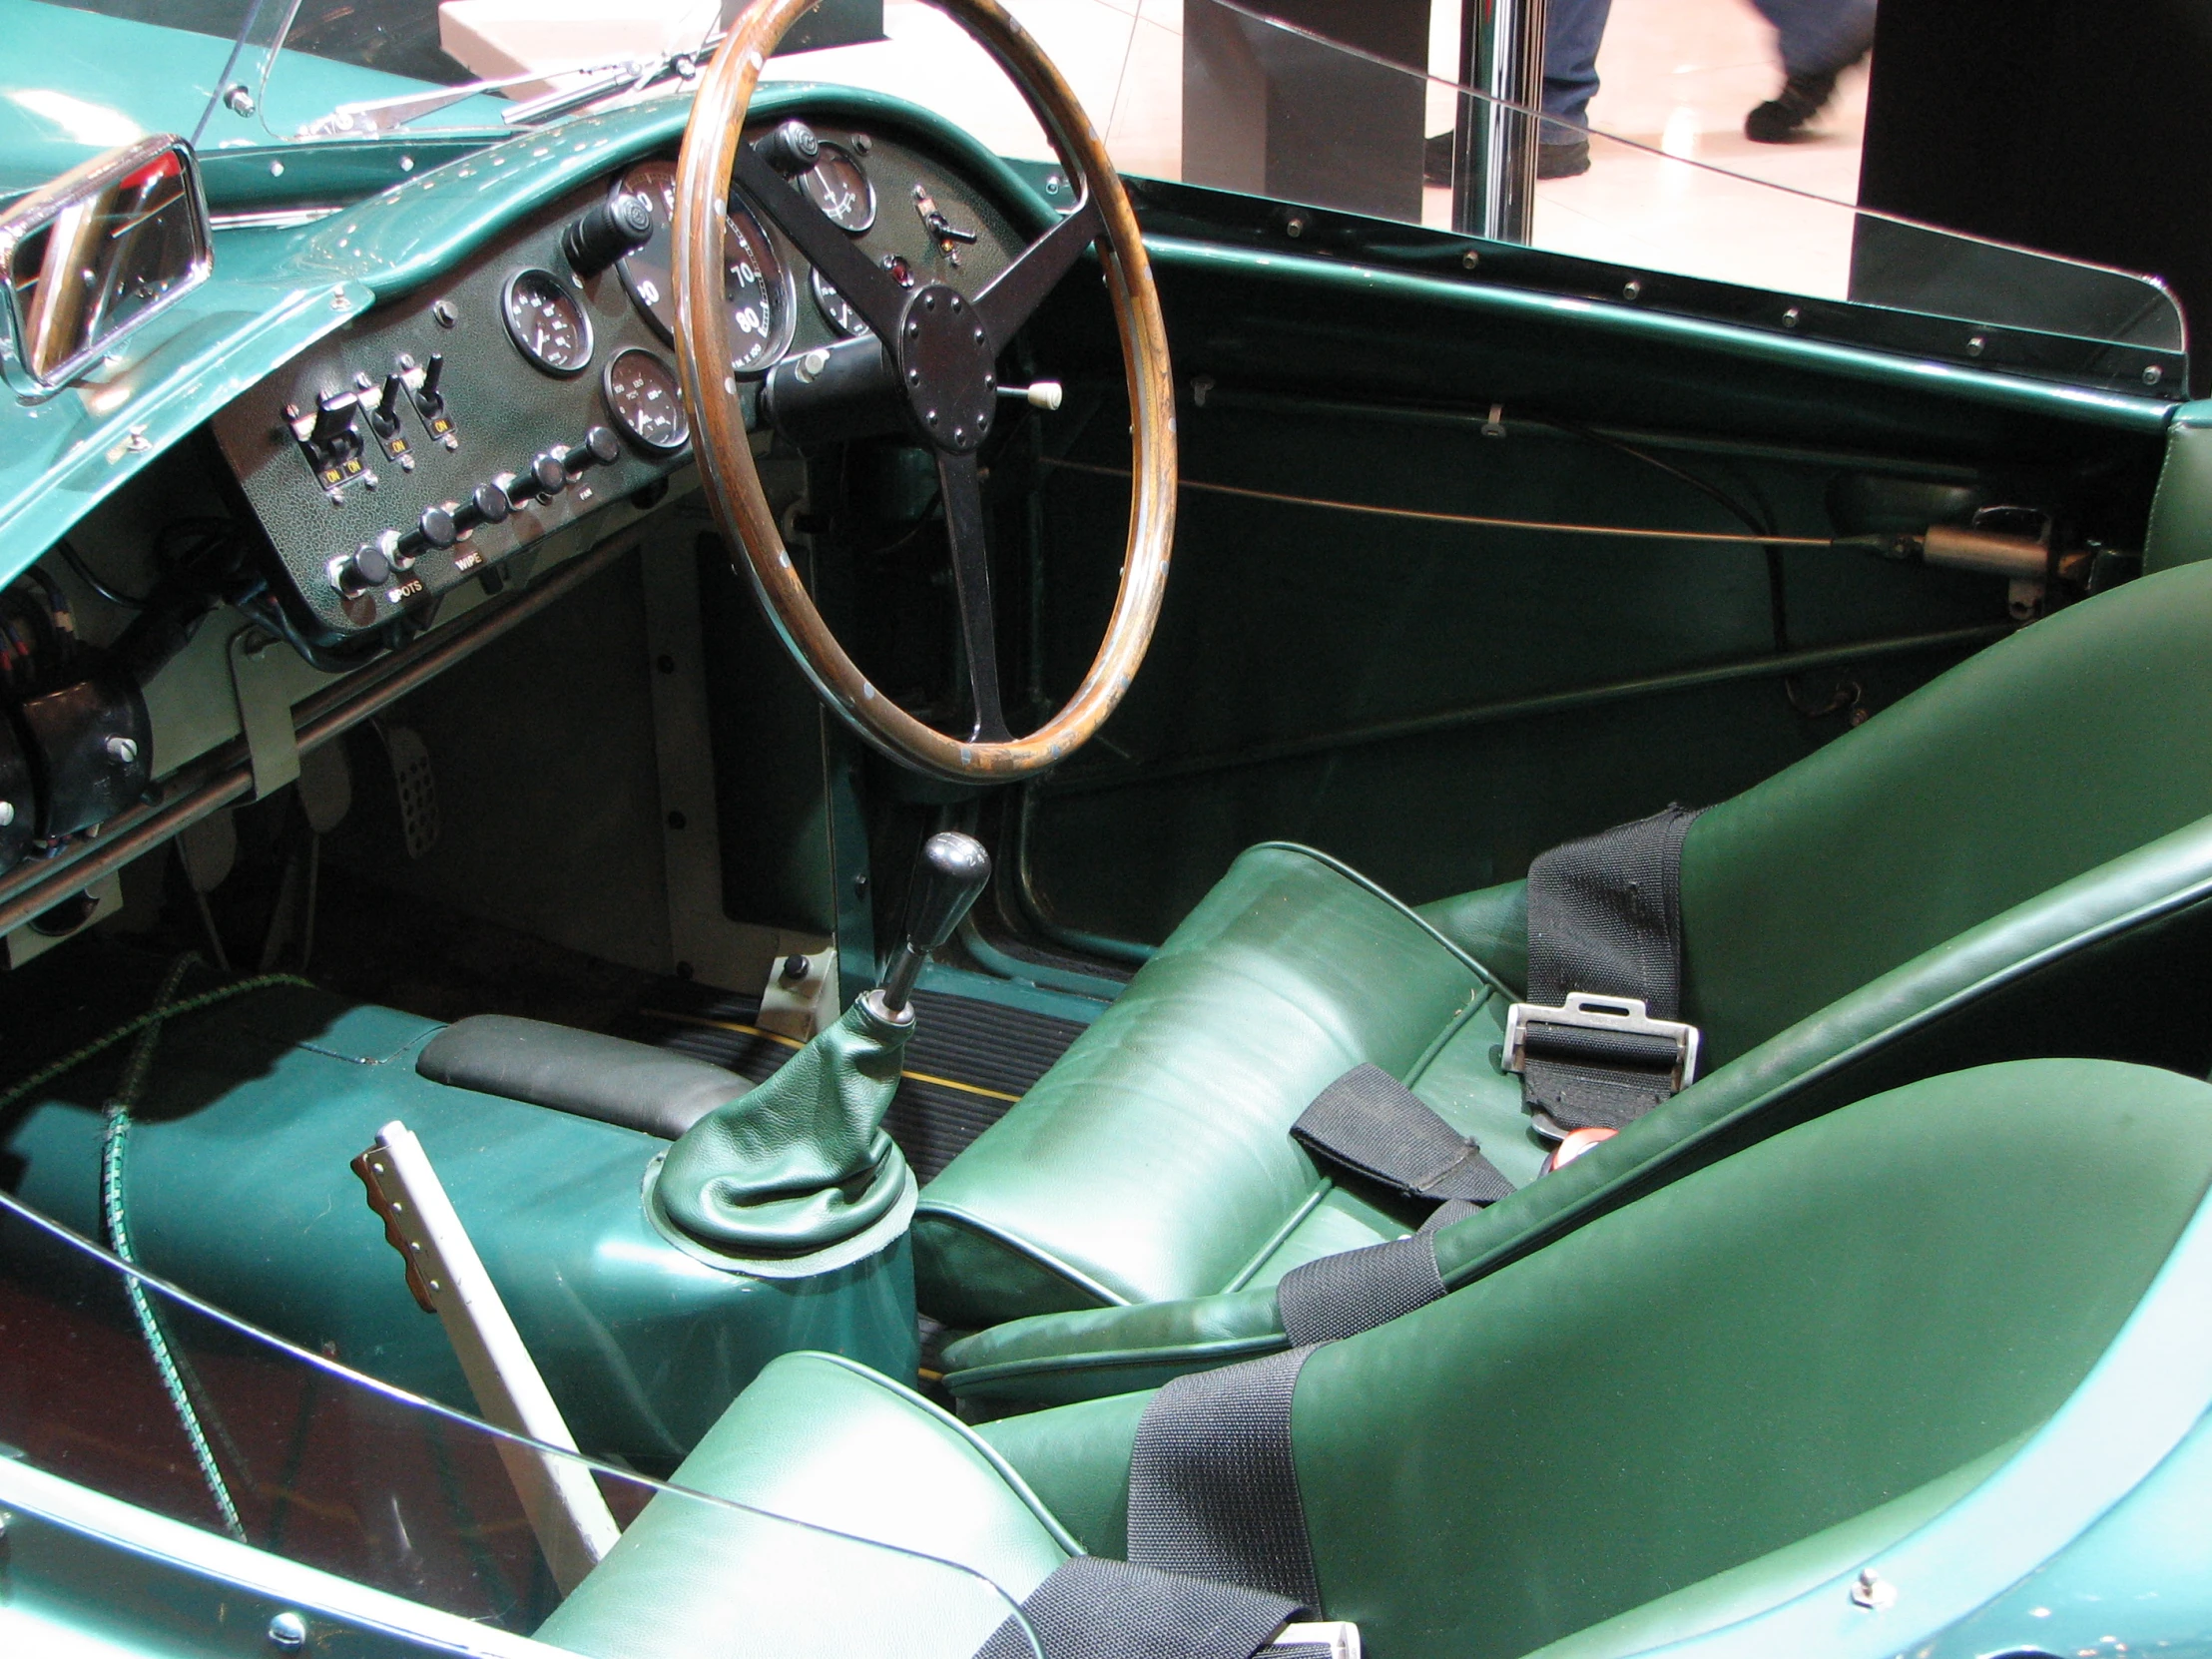 the cockpit and steering wheel of a sports car